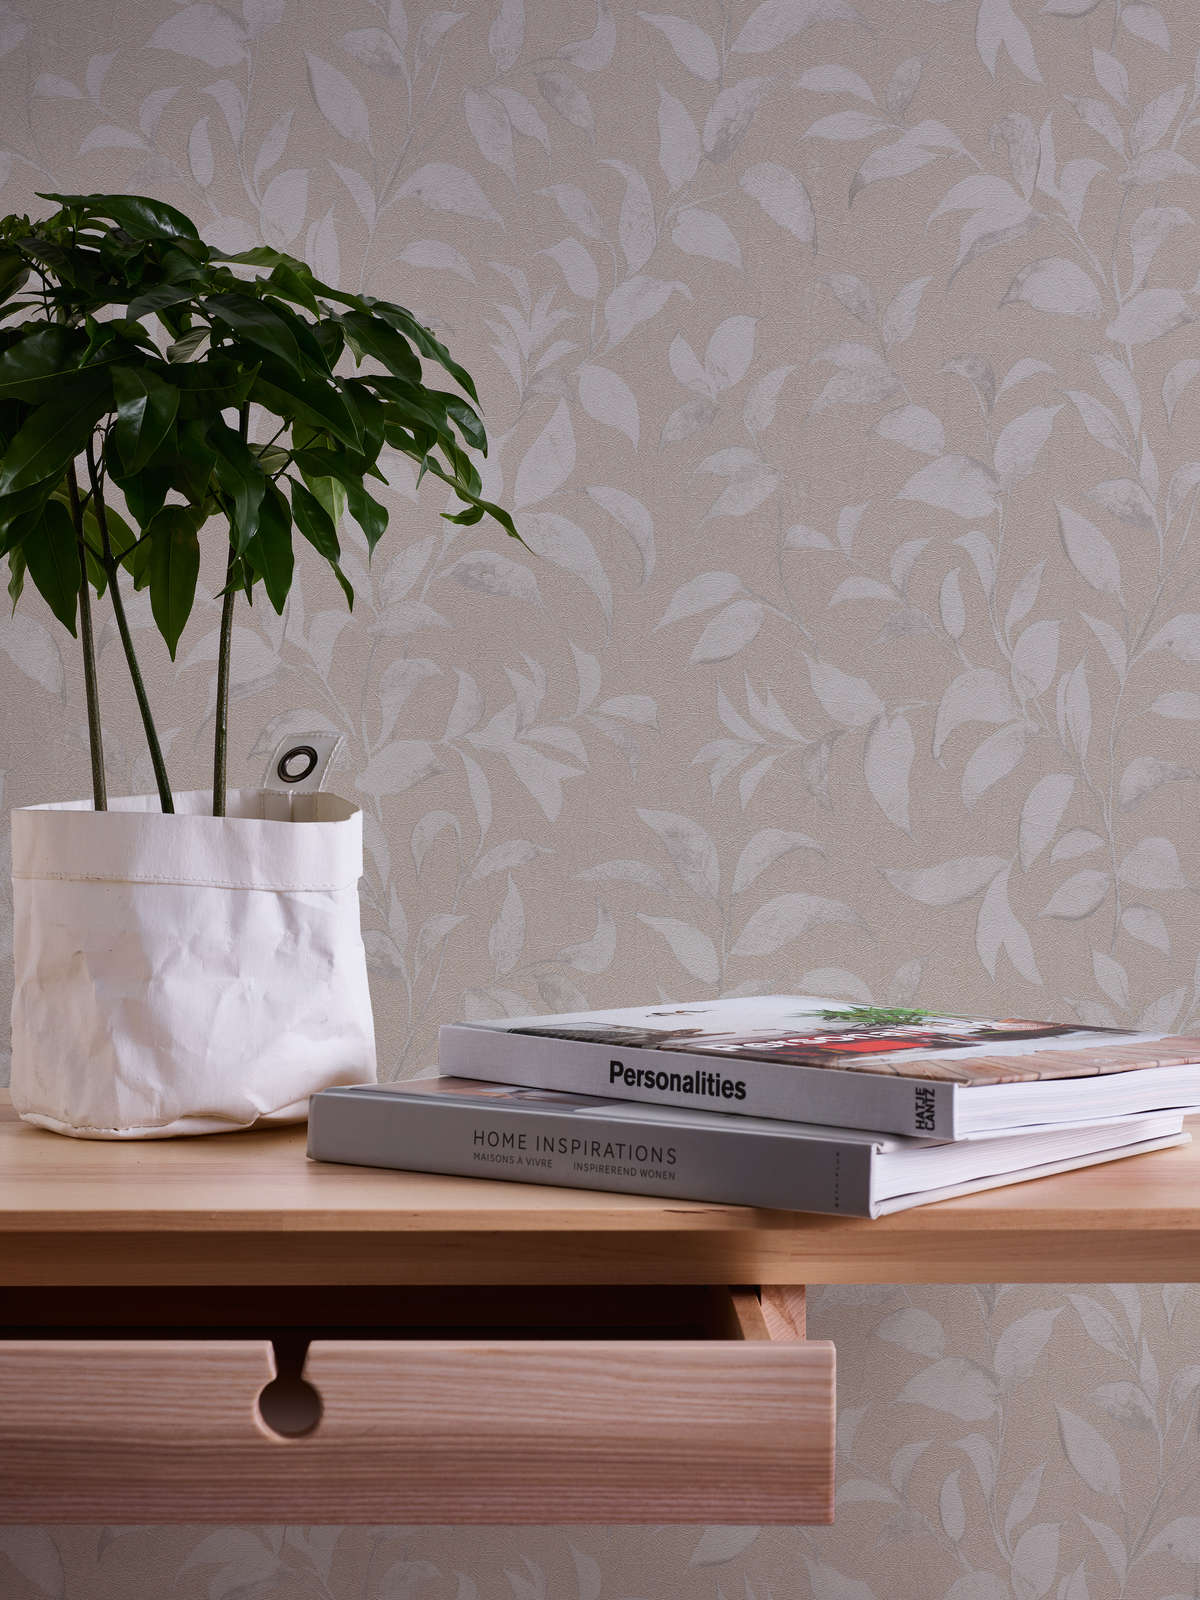             Floral leaves wallpaper shimmering textured - grey, silver
        